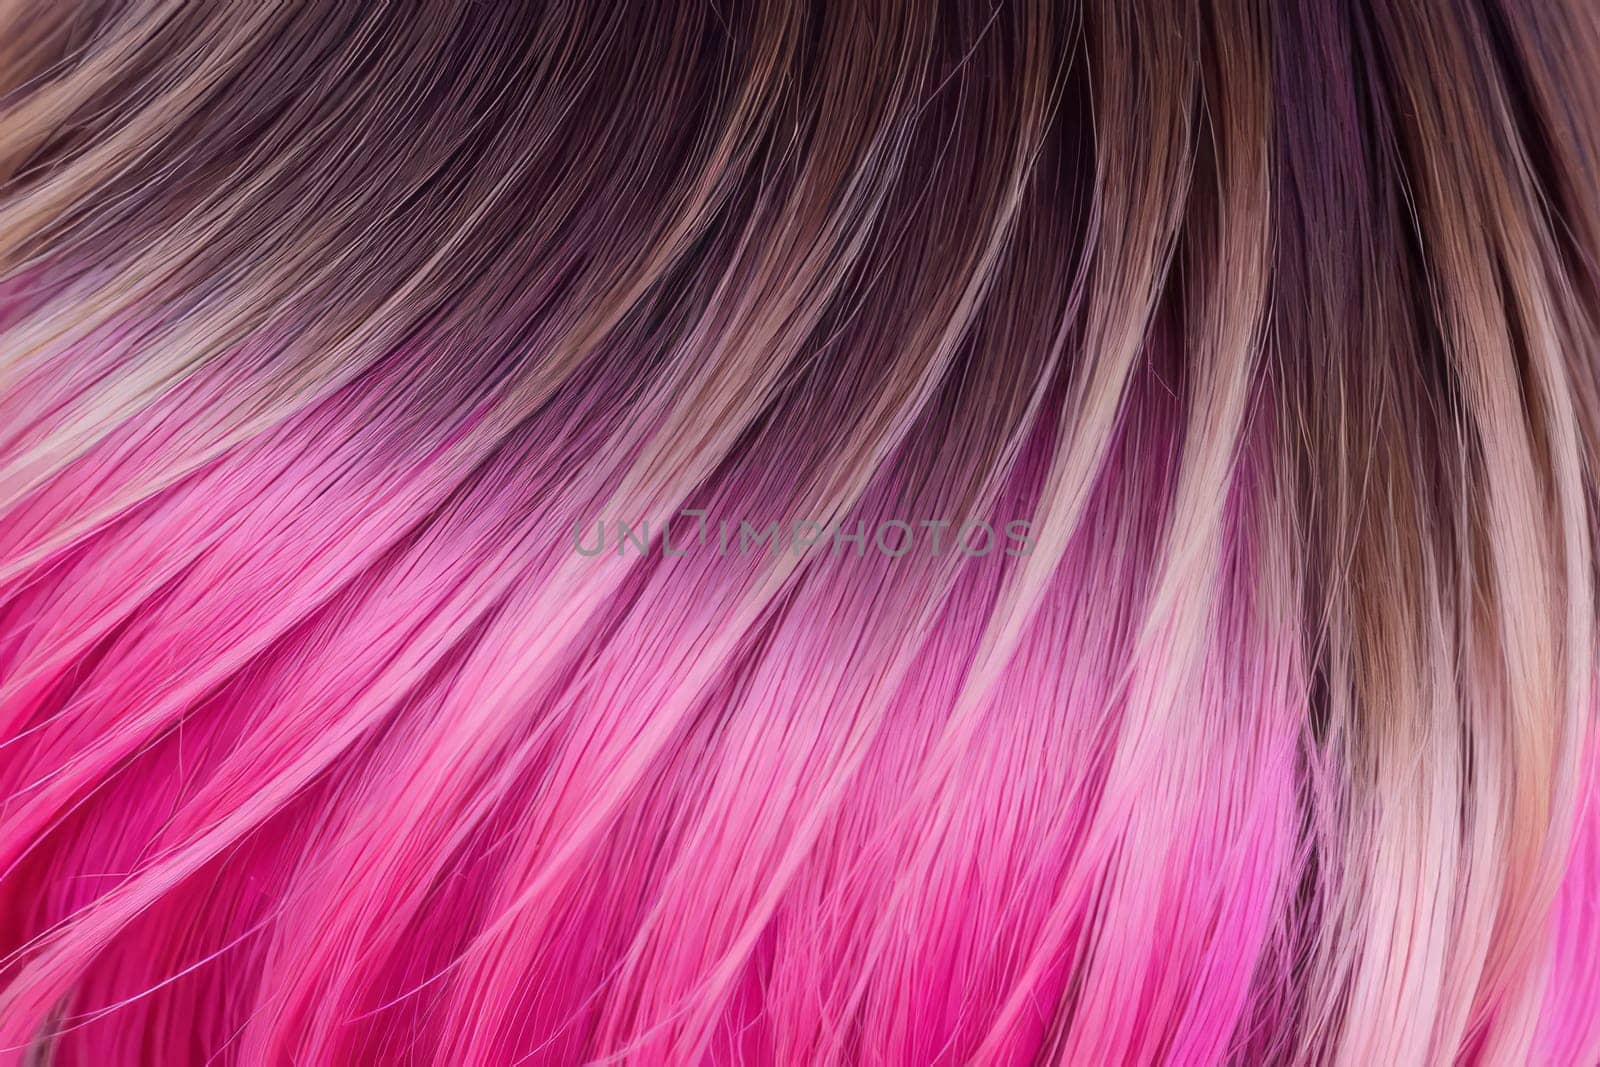 A captivating close-up view of the beautiful pink hair displays the artistic ombre technique, exuding a sense of glamour and refinement. by Annu1tochka